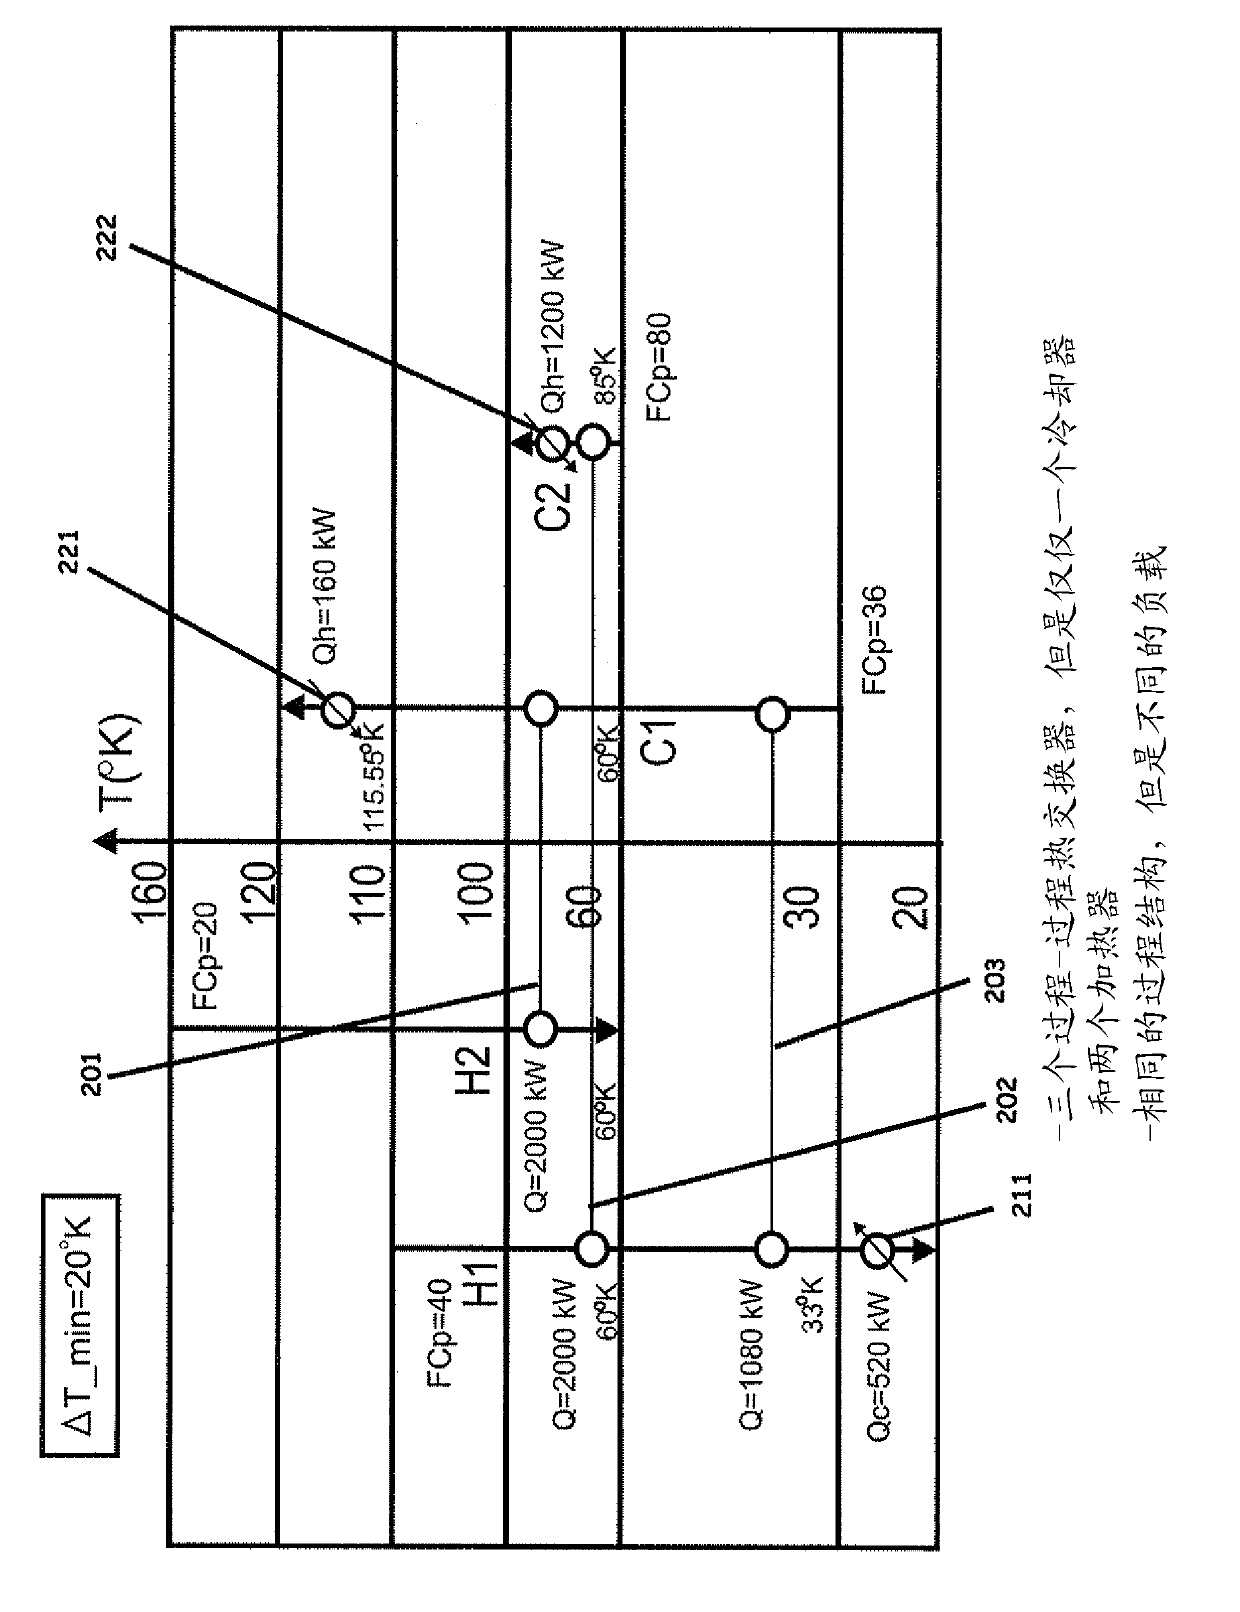 System, method, and program product for synthesizing non-constrained and constrained heat exchanger networks